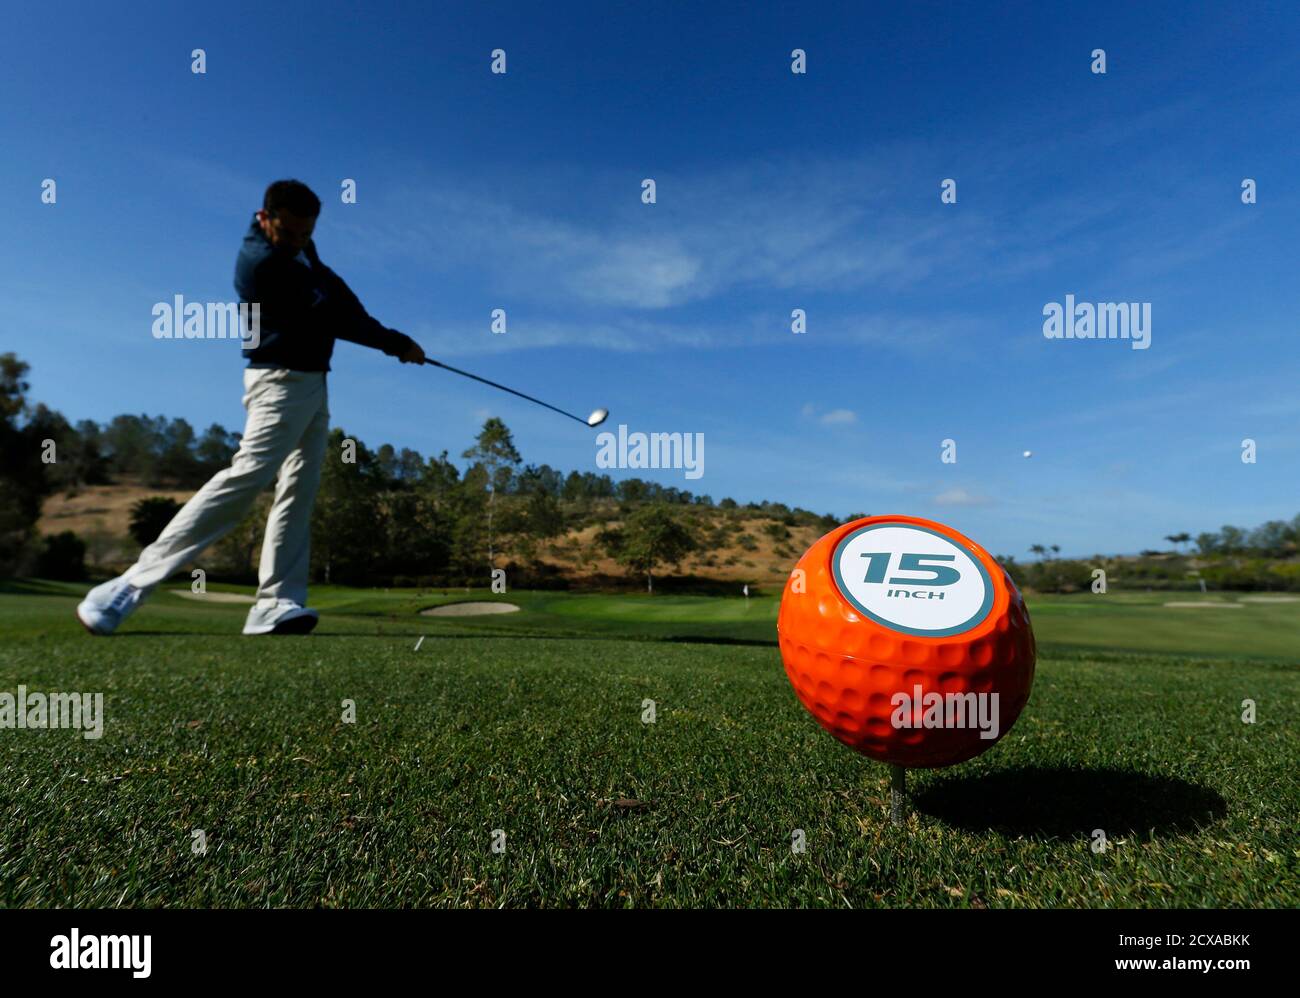 A tee marker noting that the hole has a 15-inch inch hole is shown at the TaylorMade golf facility in Carlsbad, California May 9, 2014. According to the Golf Foundation (NGF),